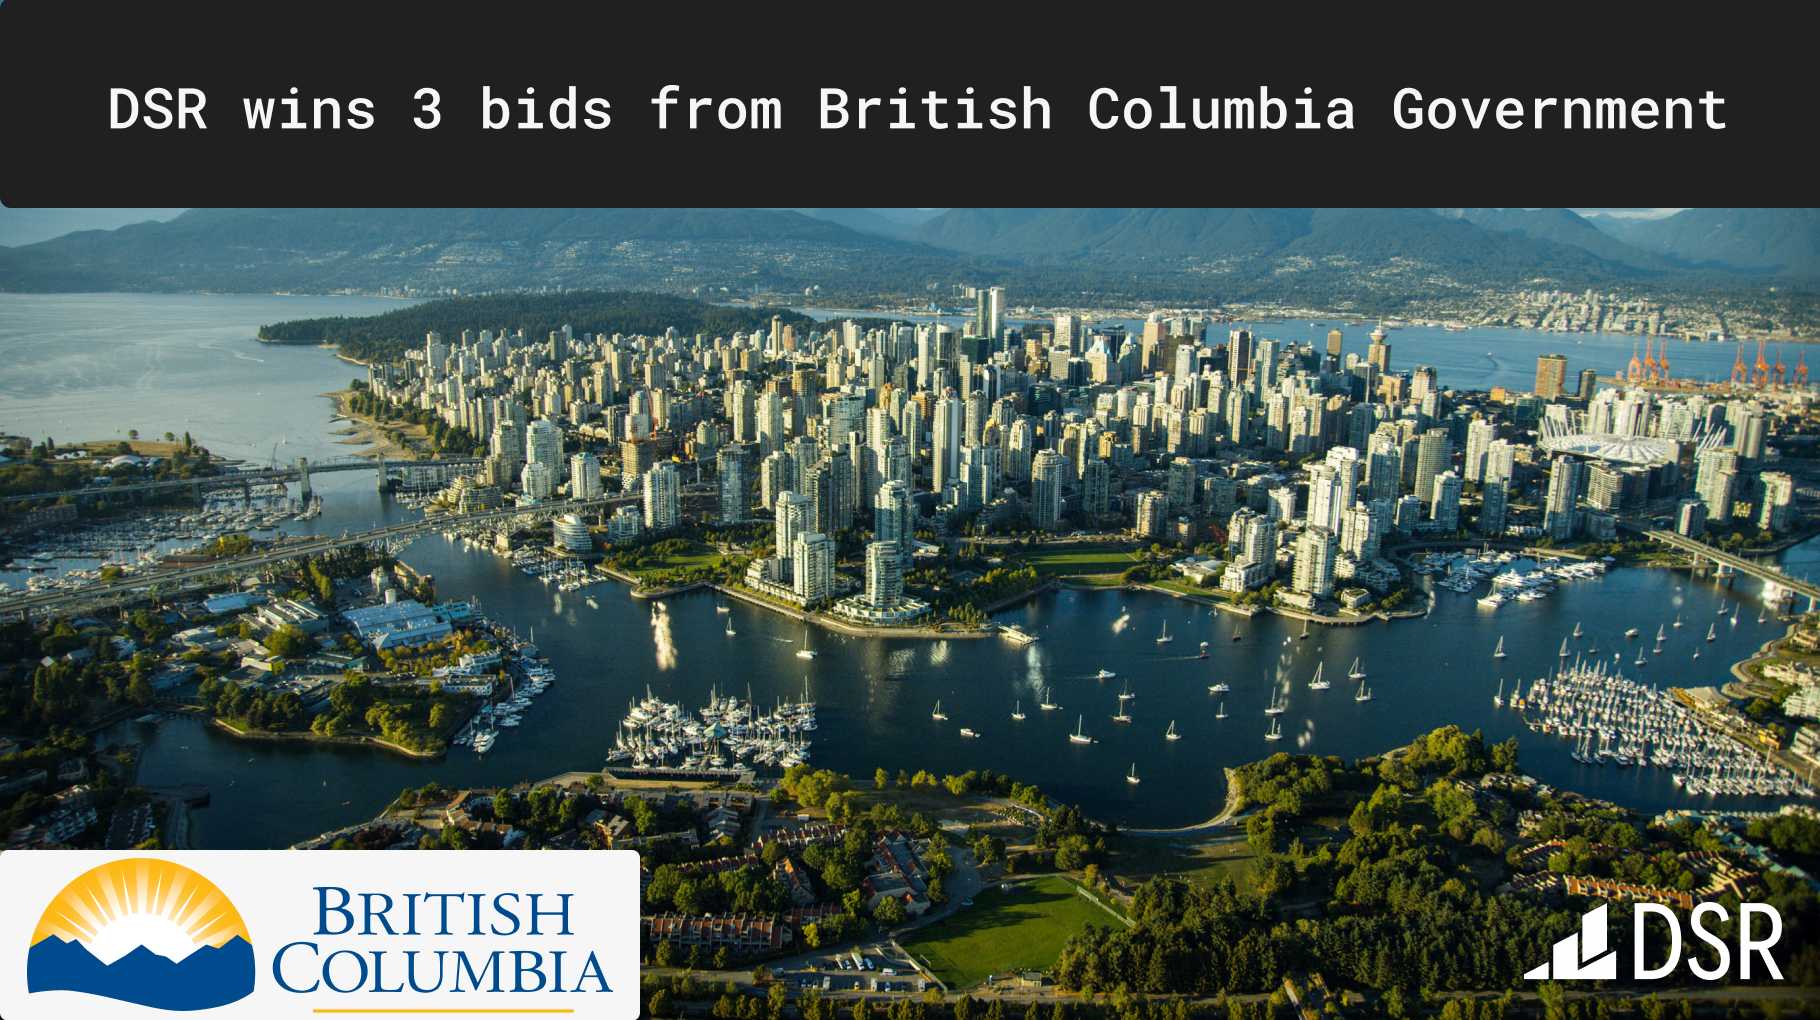 DSR wins 3 bids from the Government of British Columbia